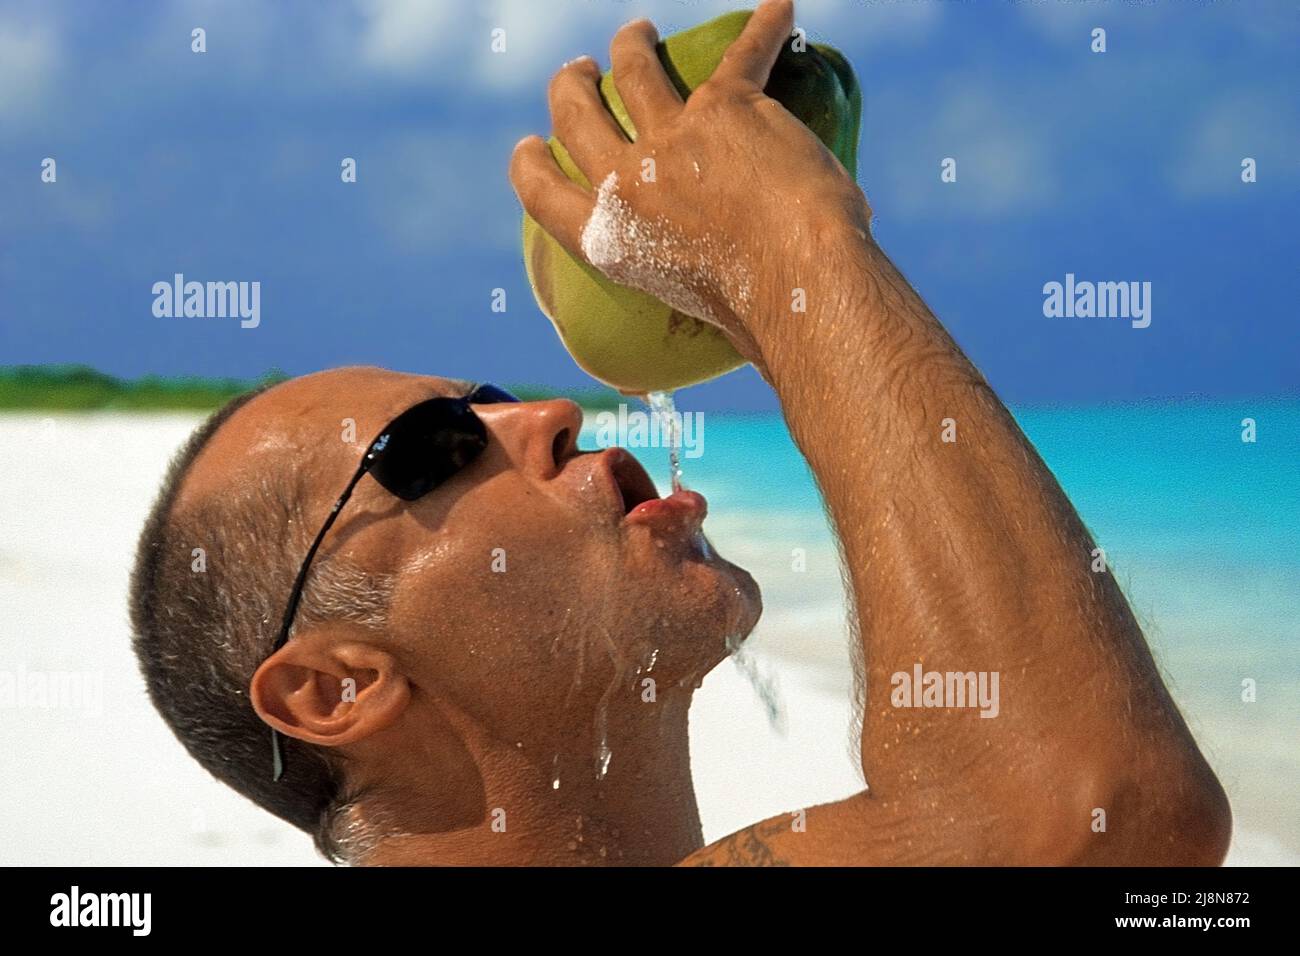 Tourist drinking  coconut water at the beach of a small uninhabitated island, Laviyani Atoll, Maldives, Indian ocean, Asia Stock Photo